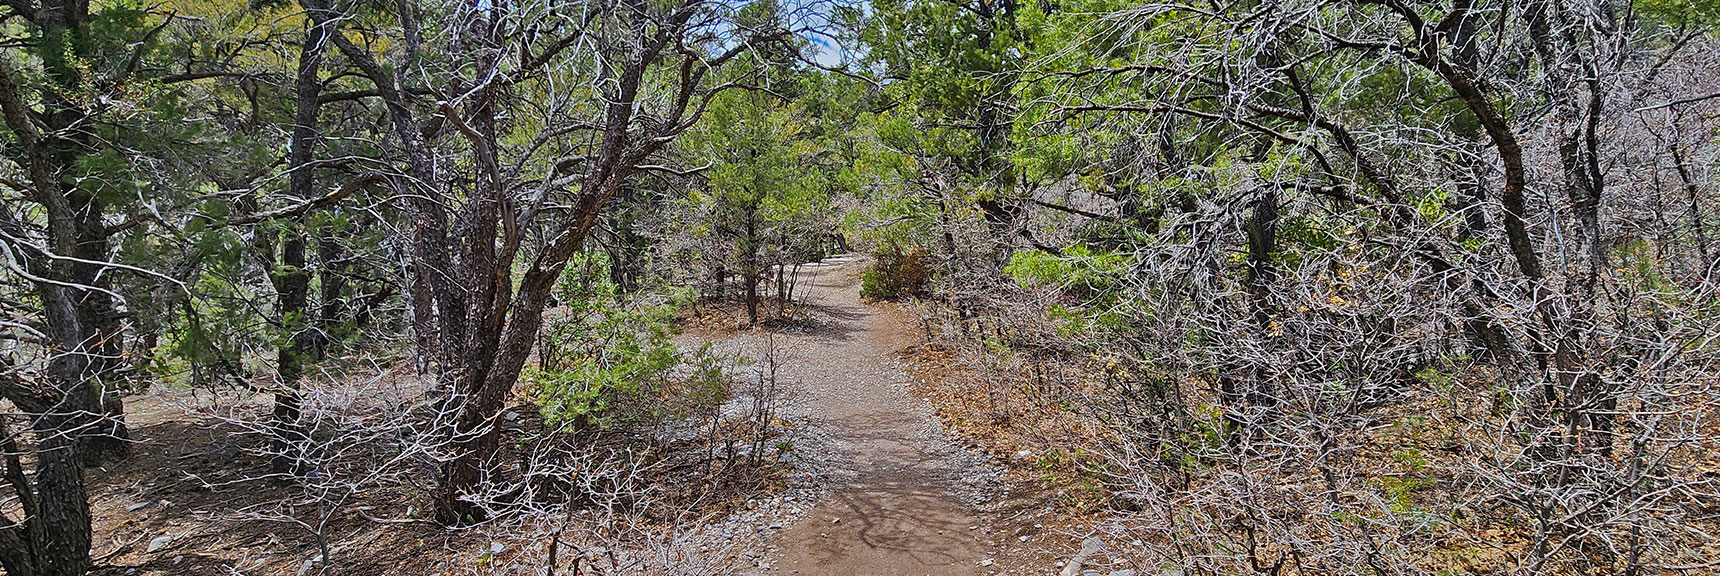 Beautiful, Forested Trail | Fletcher Canyon Trail | Mt Charleston Wilderness | Spring Mountains, Nevada